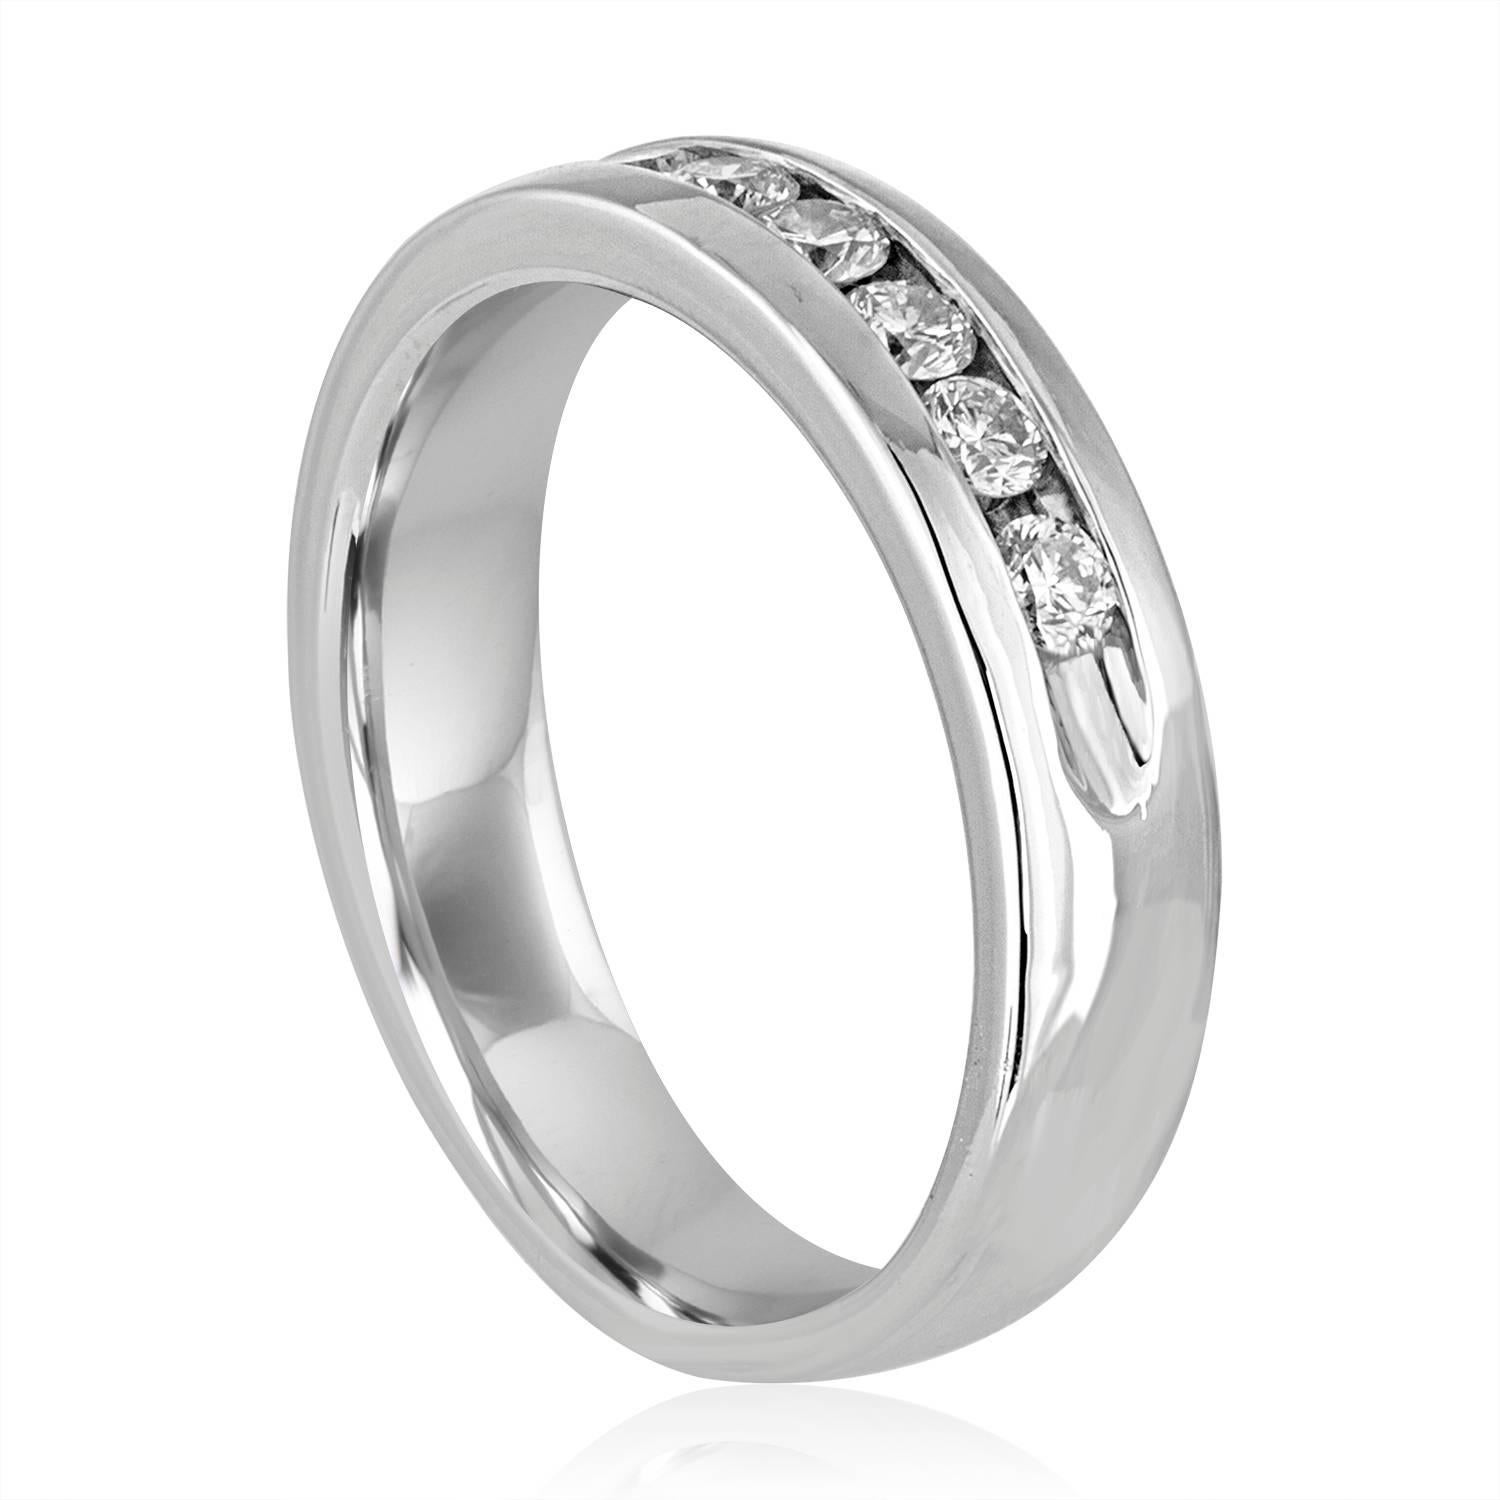 Men's Diamond Wedding Band Ring
The Ring is Platinum 950
The Round Cut Diamonds are 1.00Ct G/H VS
The ring is a size 12.5, sizable
The ring weighs 16.4 grams